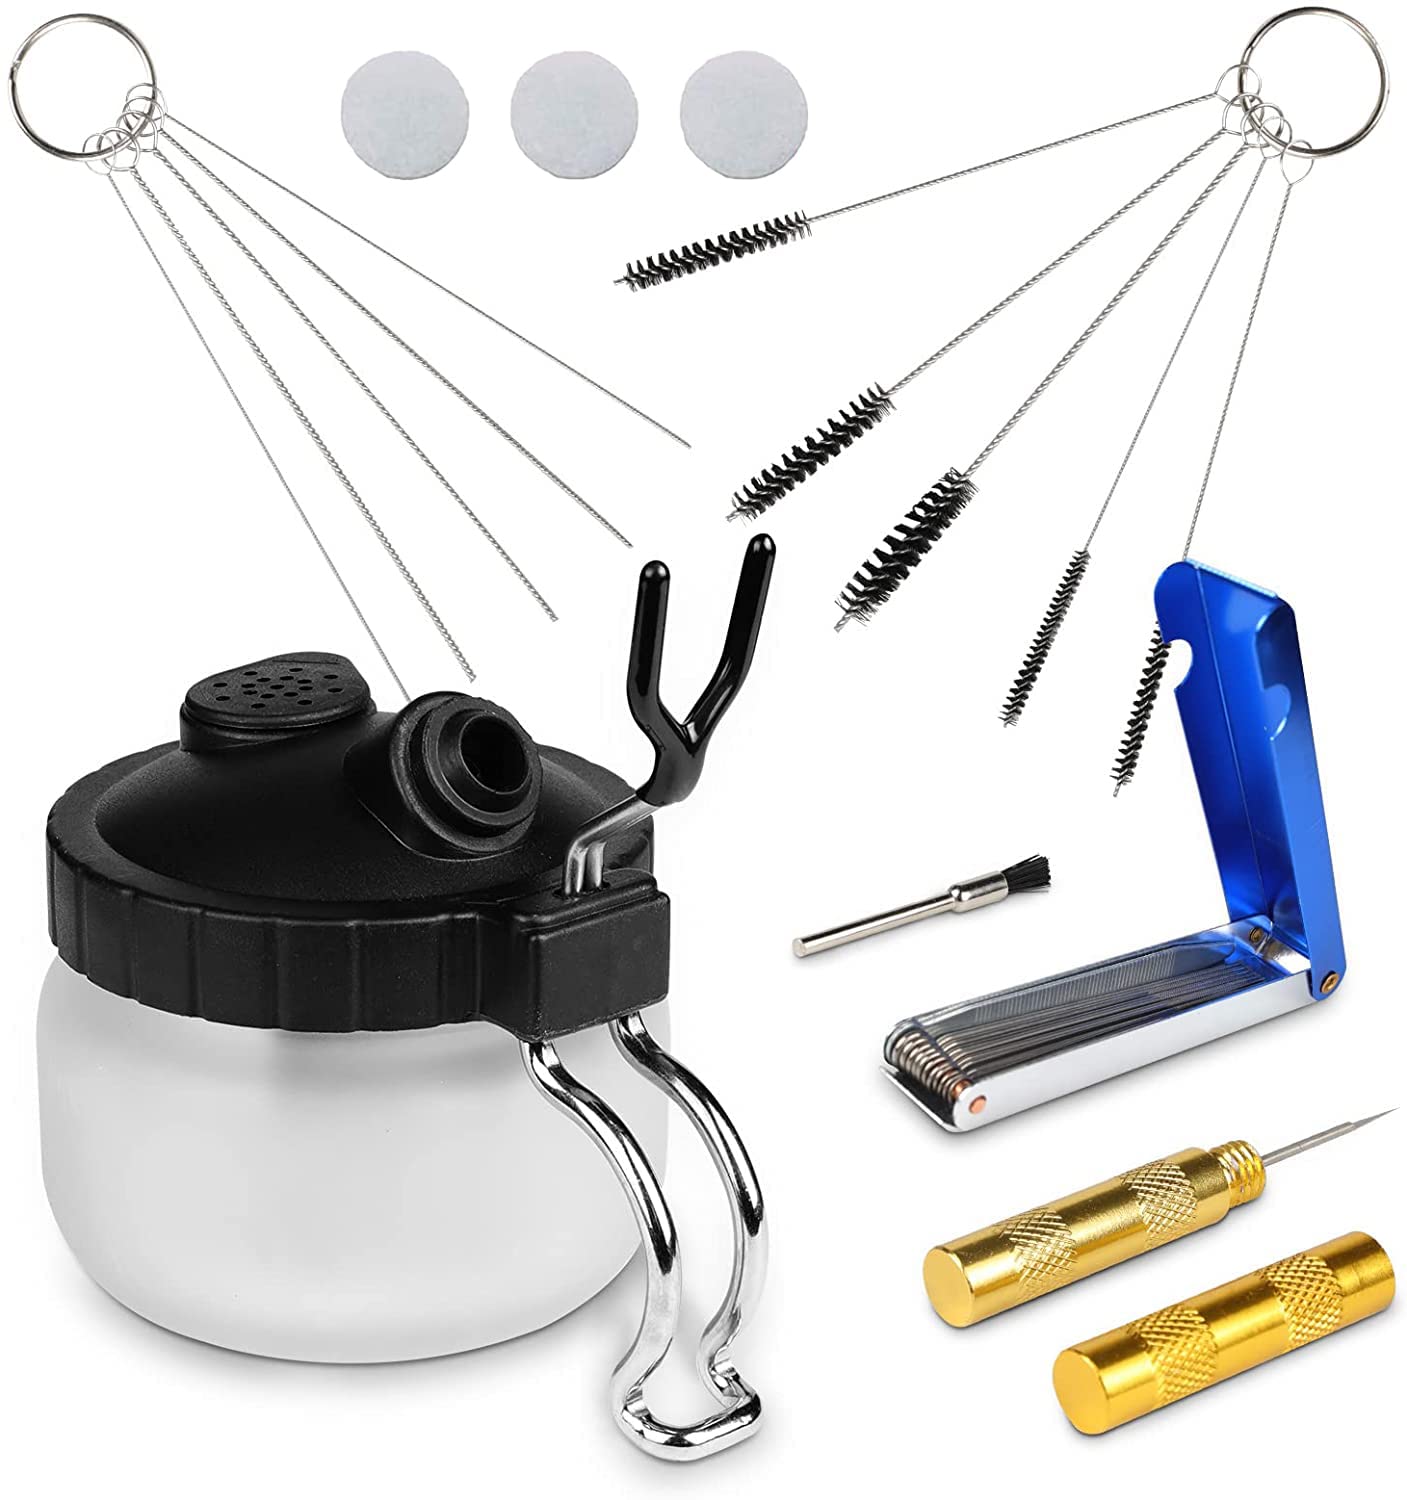 Airbrush Cleaning Kit With 5 pc Cleaning Needles, 5 pc Brushes , 1 Wash  Needle Aibrush Cleaner For Foundation&Colors